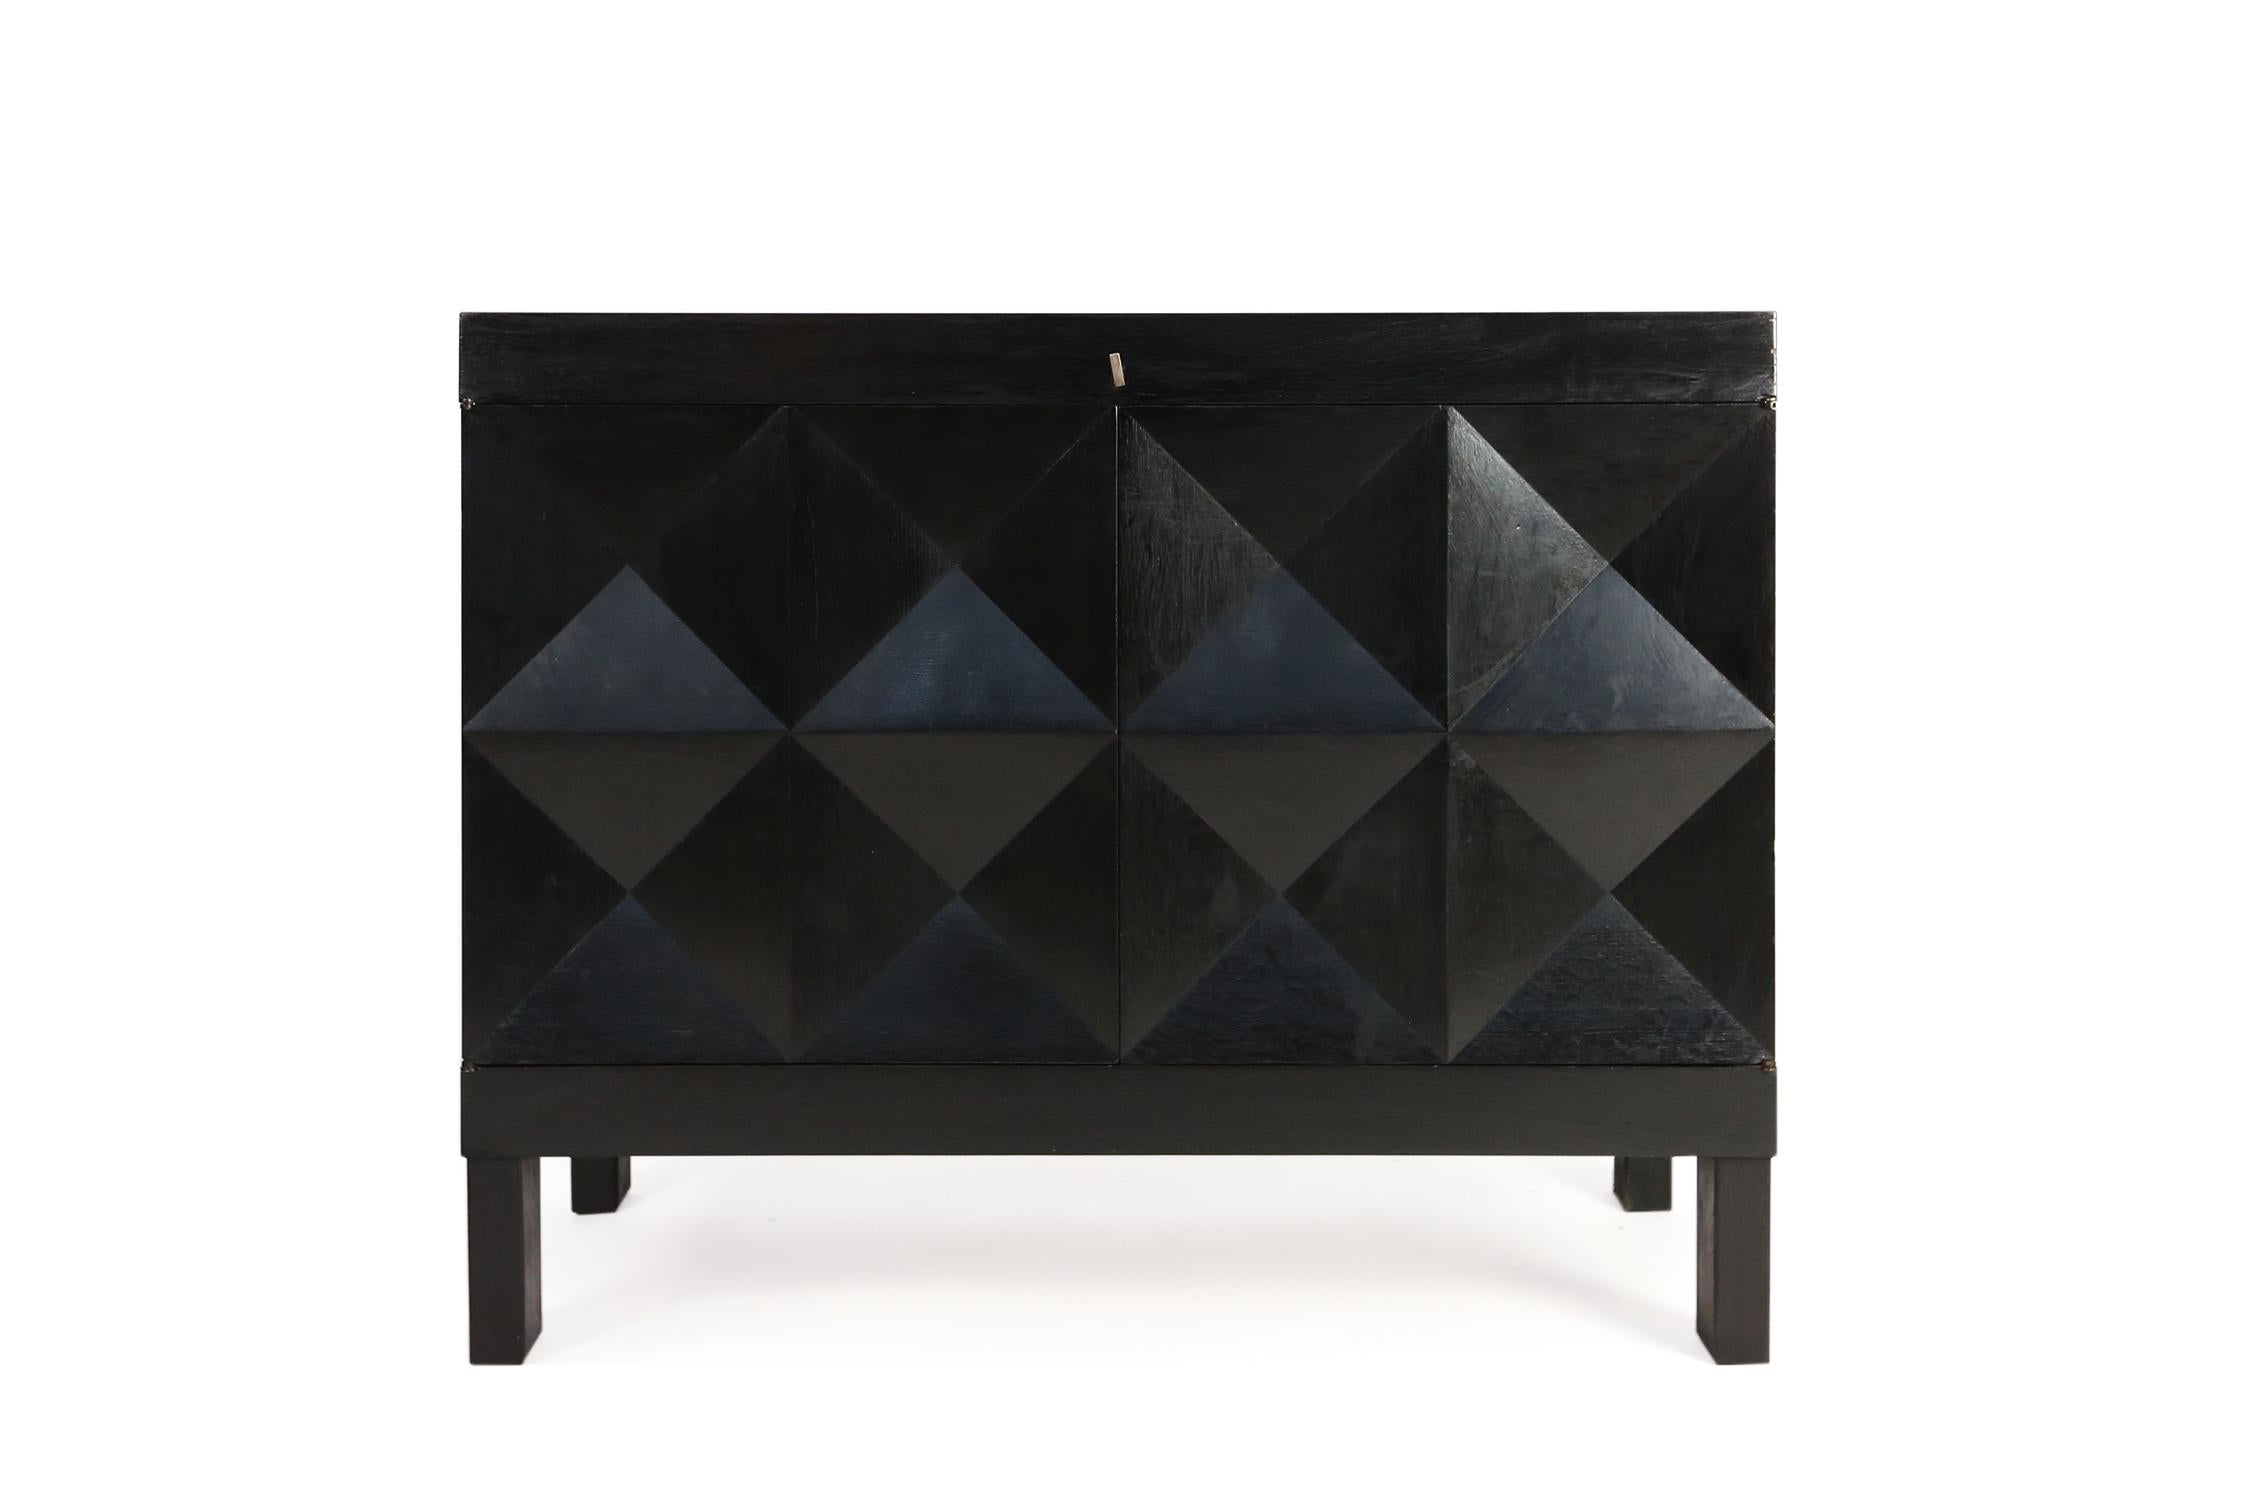 This small sideboard with geometric doors is executed by De Coene., Belgium in the 1970s. The credenza shows a pyramid like pattern on its doors. The squares on the front are each divided in four quarters and the chest features square. The interior